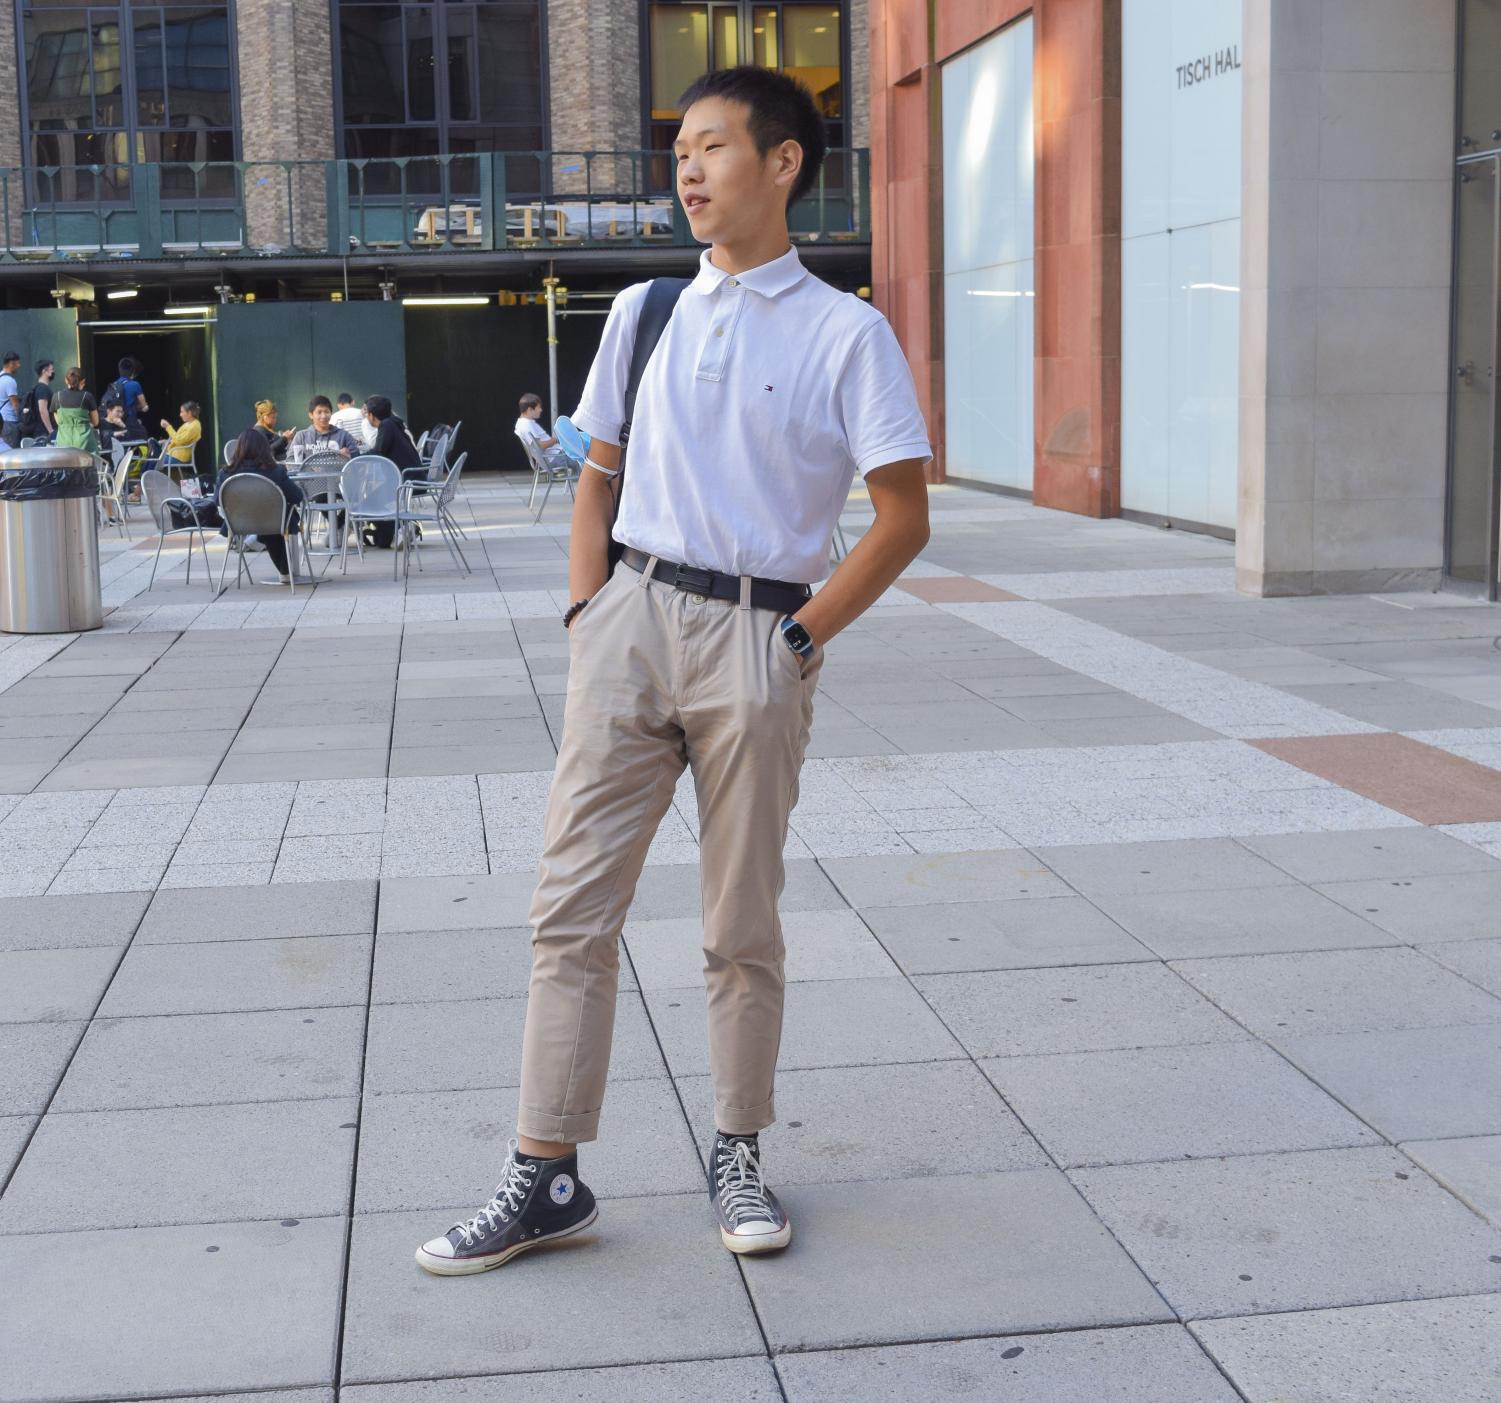 Kevin Chen stands in front of a Stern building wearing a white polo shirt, a black belt and khaki pants.